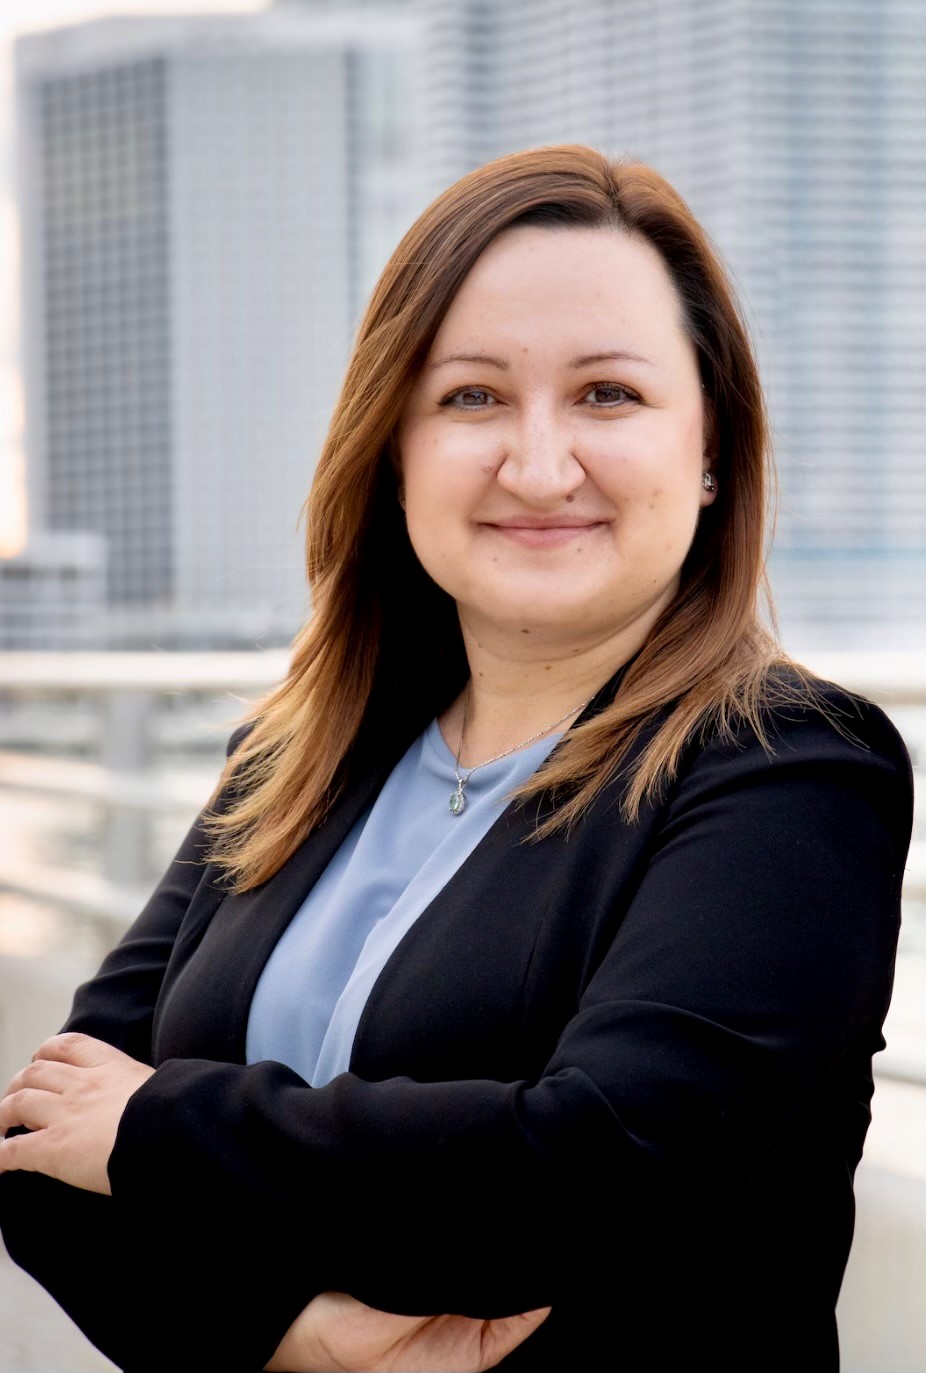 DHL Supply Chain names Mihaela Isac as new CIO in Asia Pacific